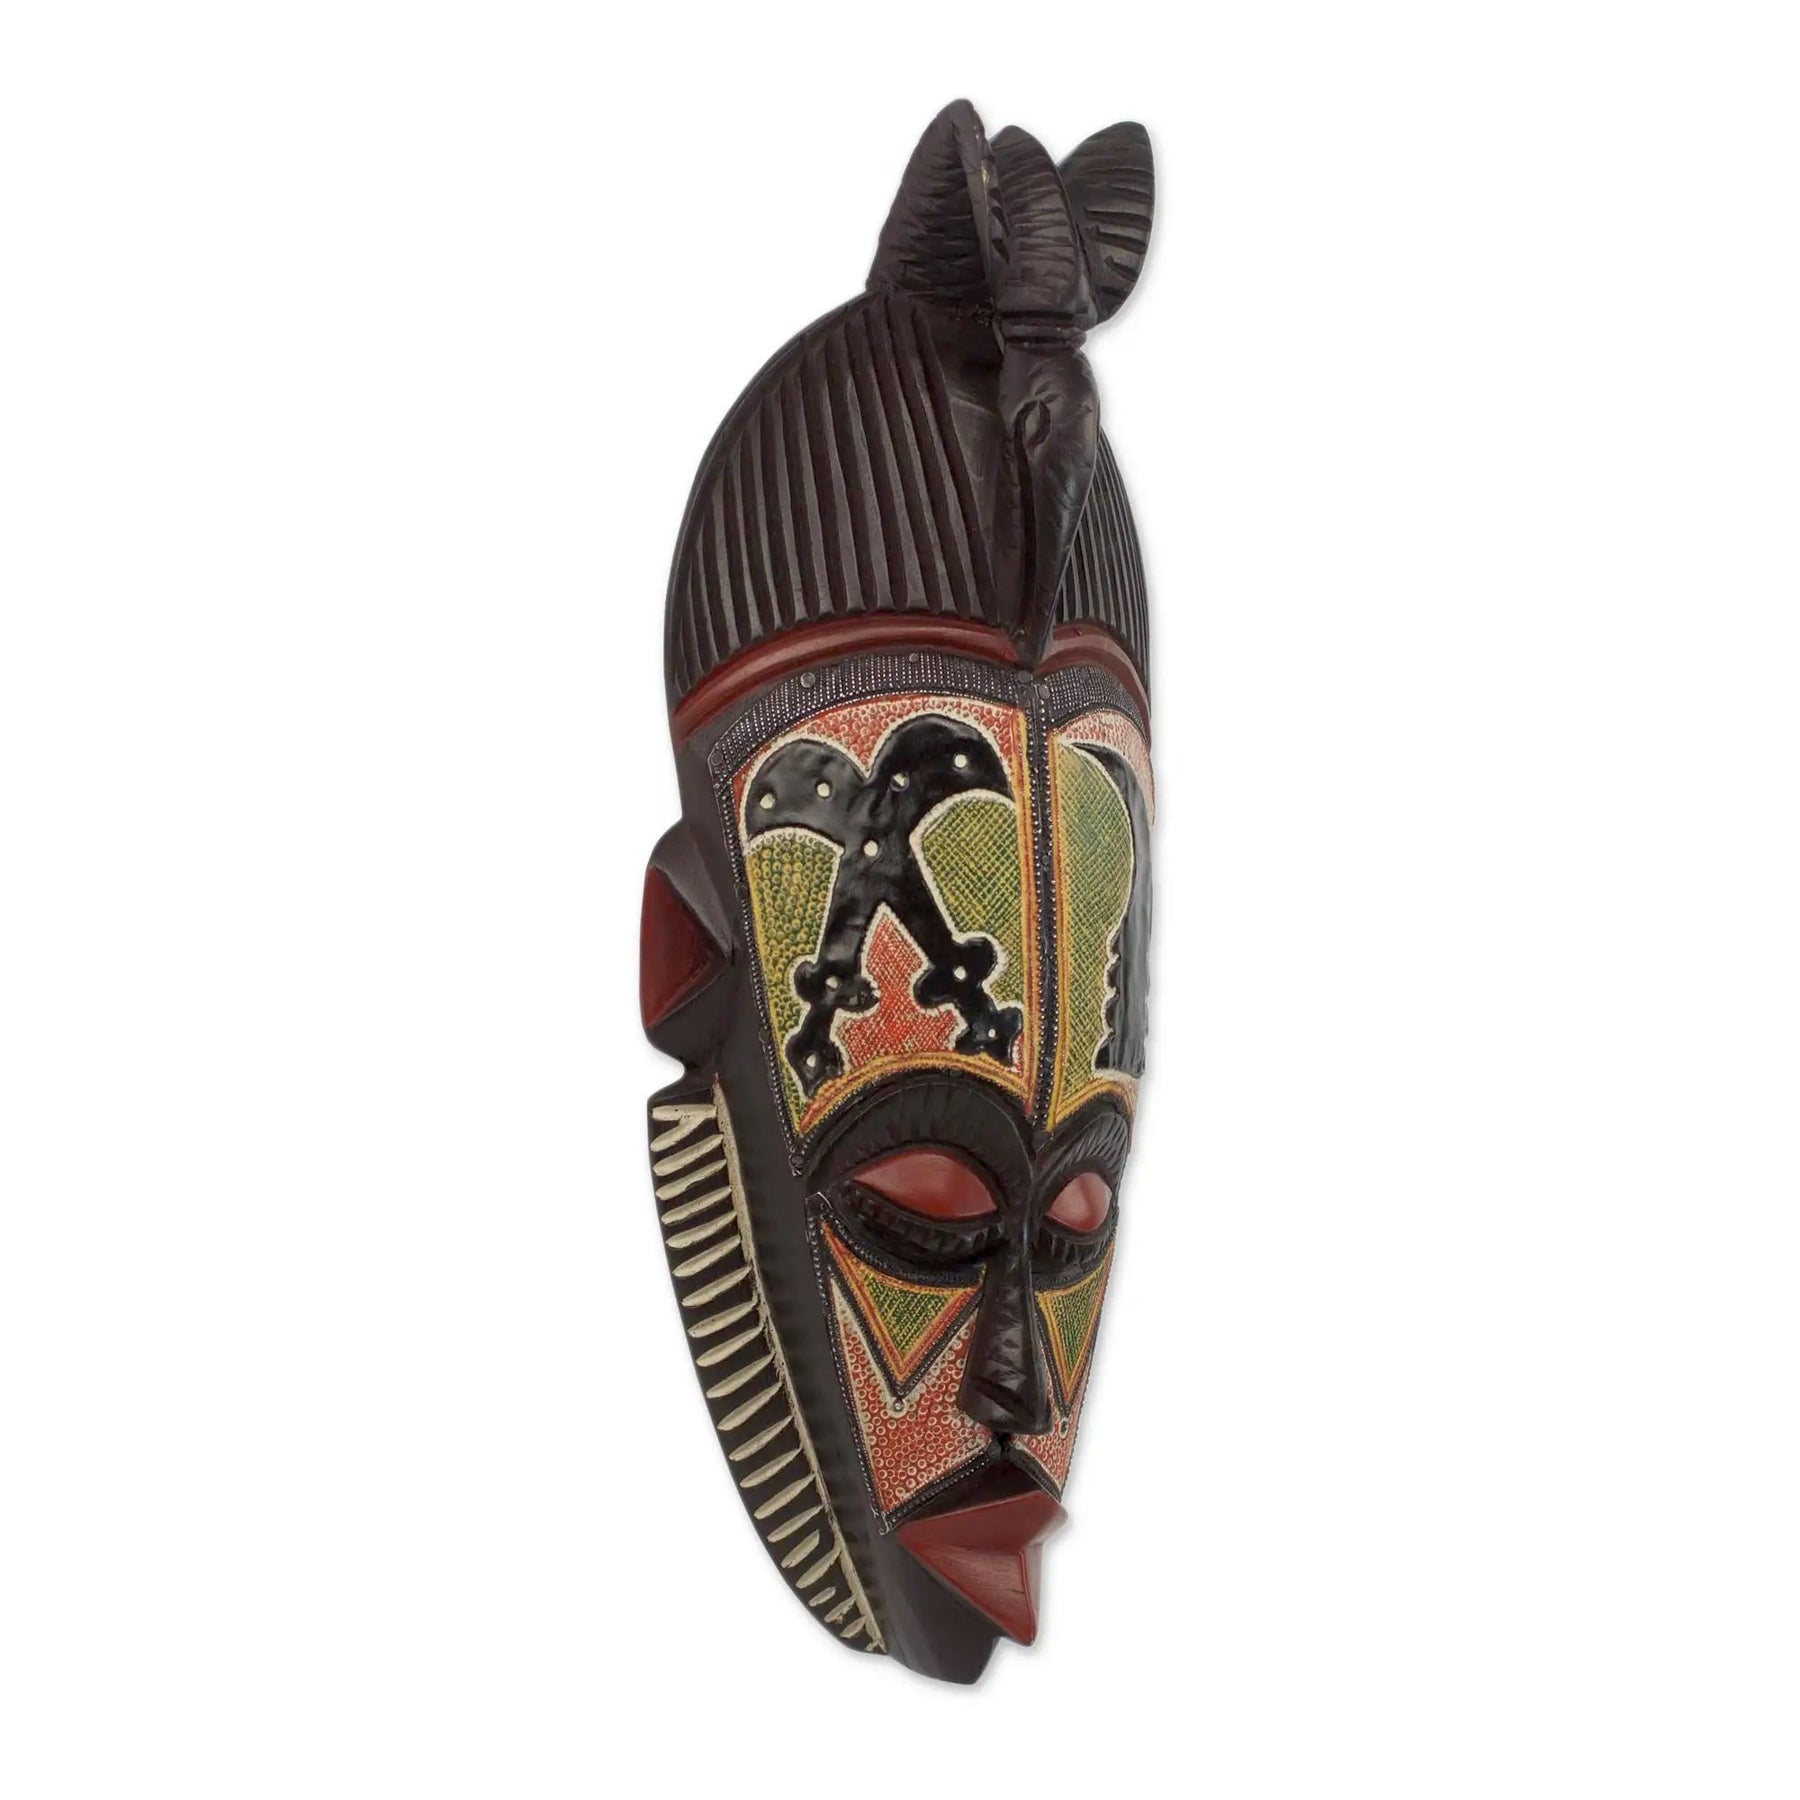 2 of 3: Akaoben and Akofen Mask: Authentic Hand Carved African Mask by Daniel Quarcoo